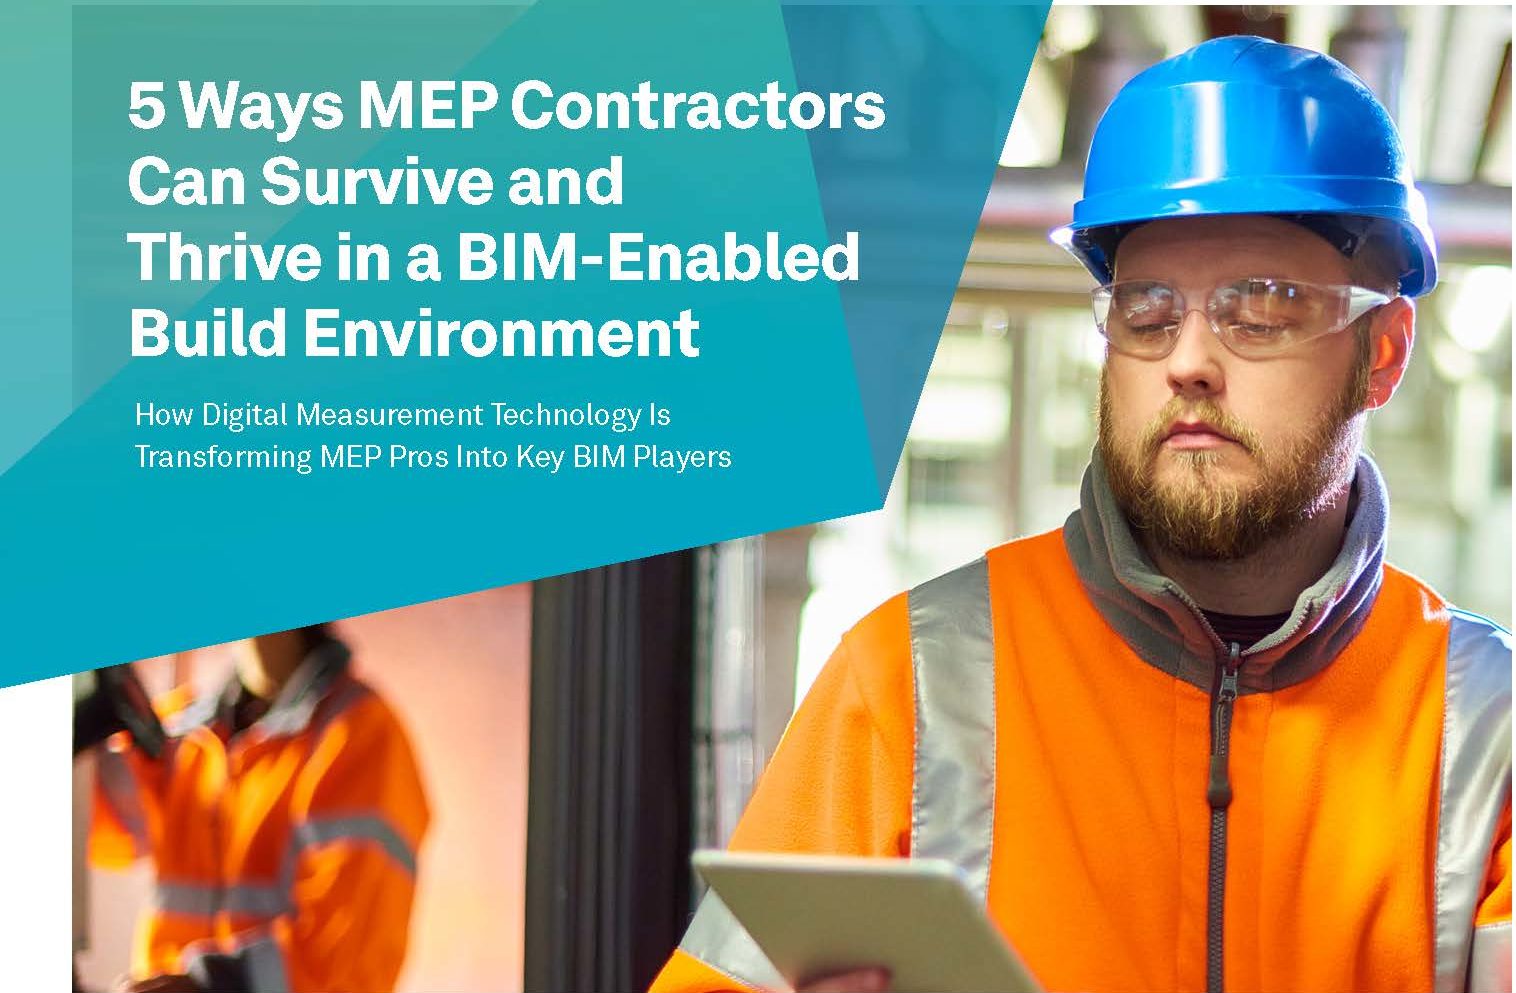 e-Guide: 5 Ways MEP Contractors Can Survive and Thrive in a BIM-Enabled Build Environment